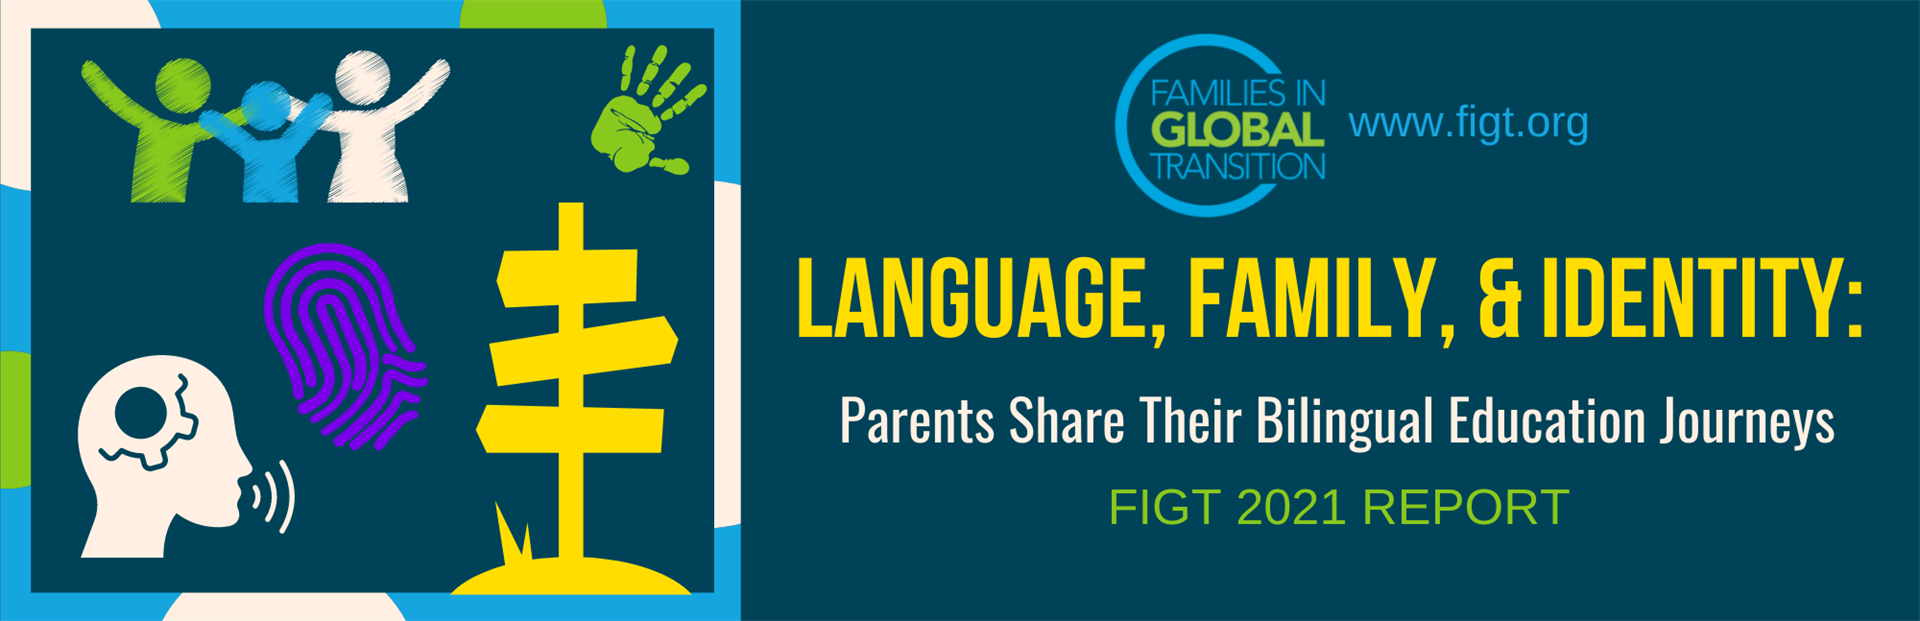 [FIGT2021 Report] Language, Family and Identity: Parents Share Their Bilingual Education Journeys